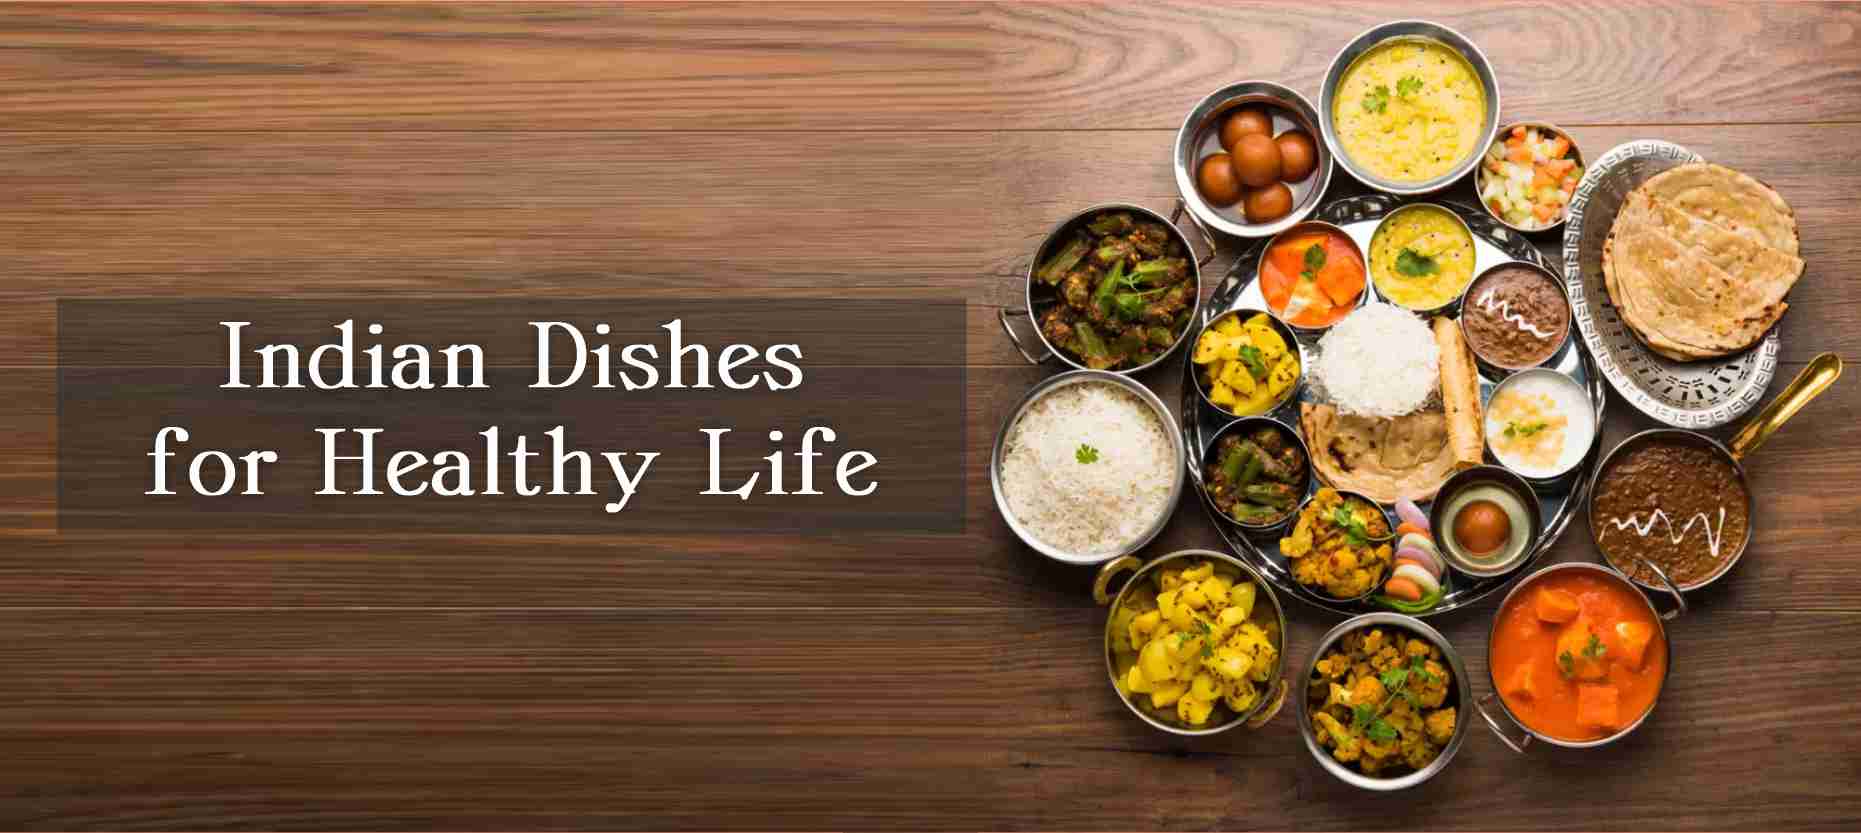 Indian Dishes for Healthy Life